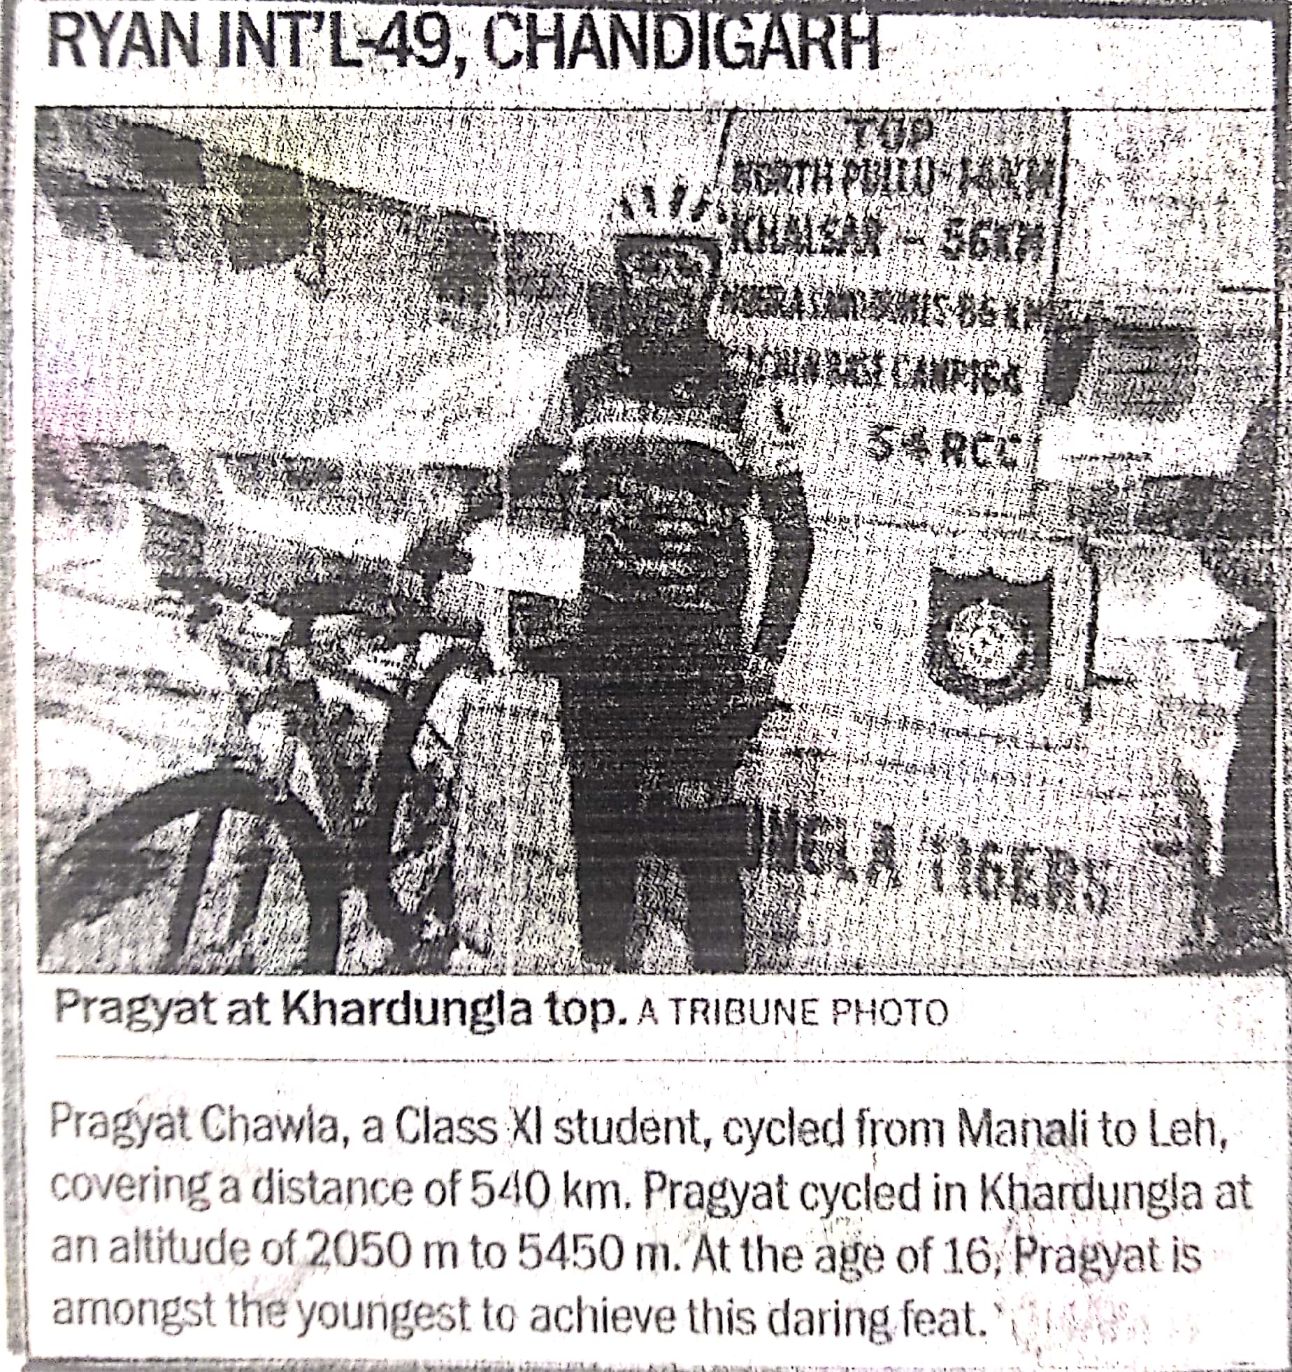 Pragyat Chawla ( Achievement in Cycle rally) was featured in The Times of India - Ryan International School, Chandigarh